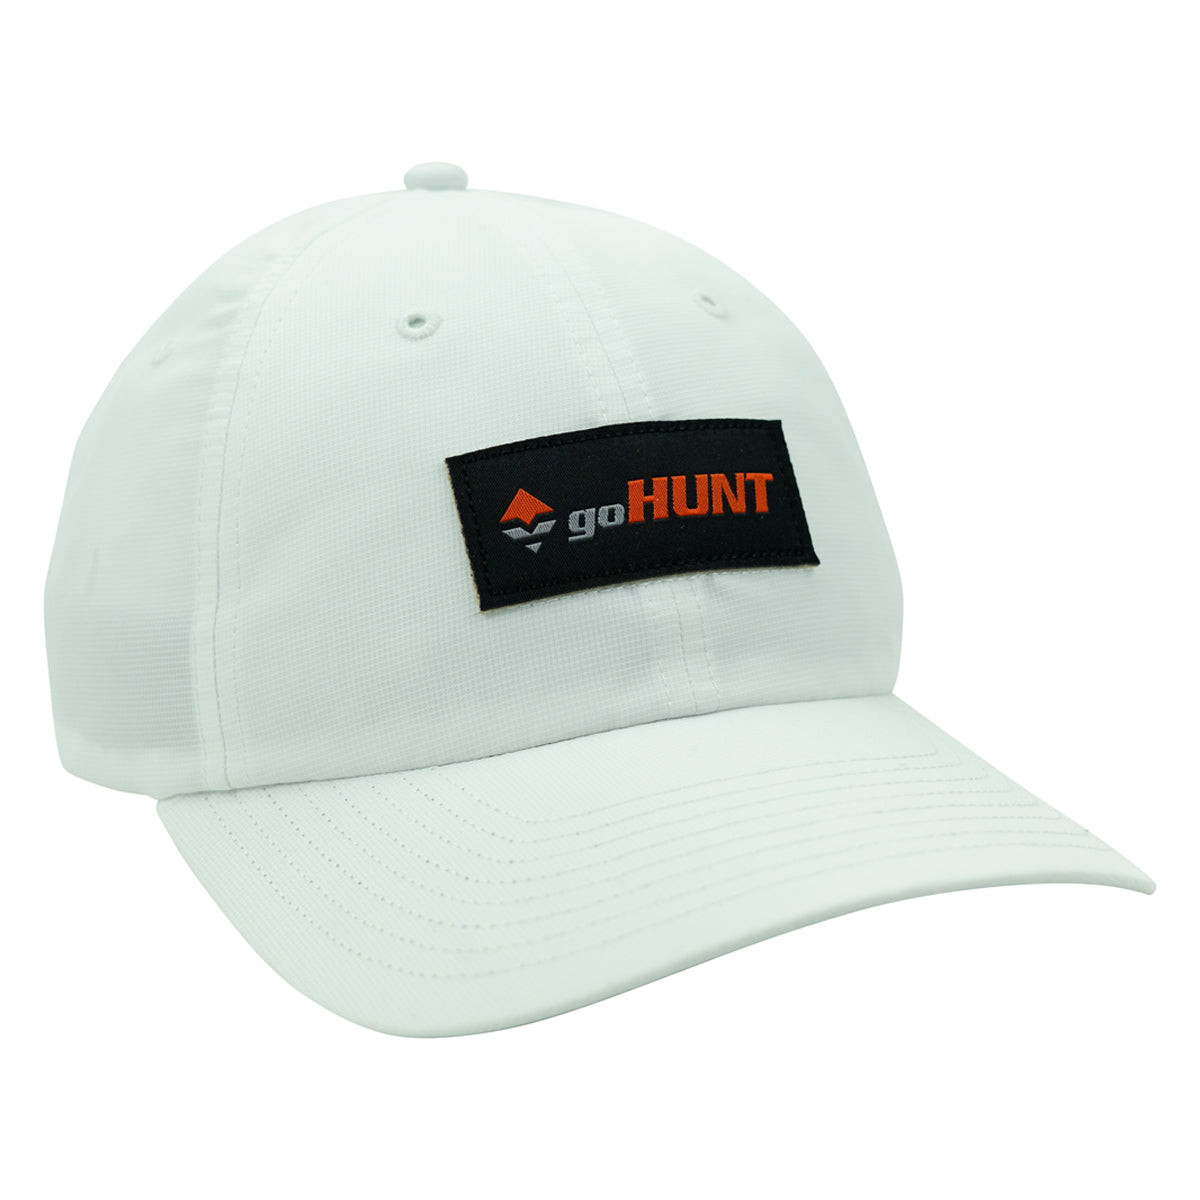 The Dad Hat by goHUNT | Apparel - goHUNT Shop